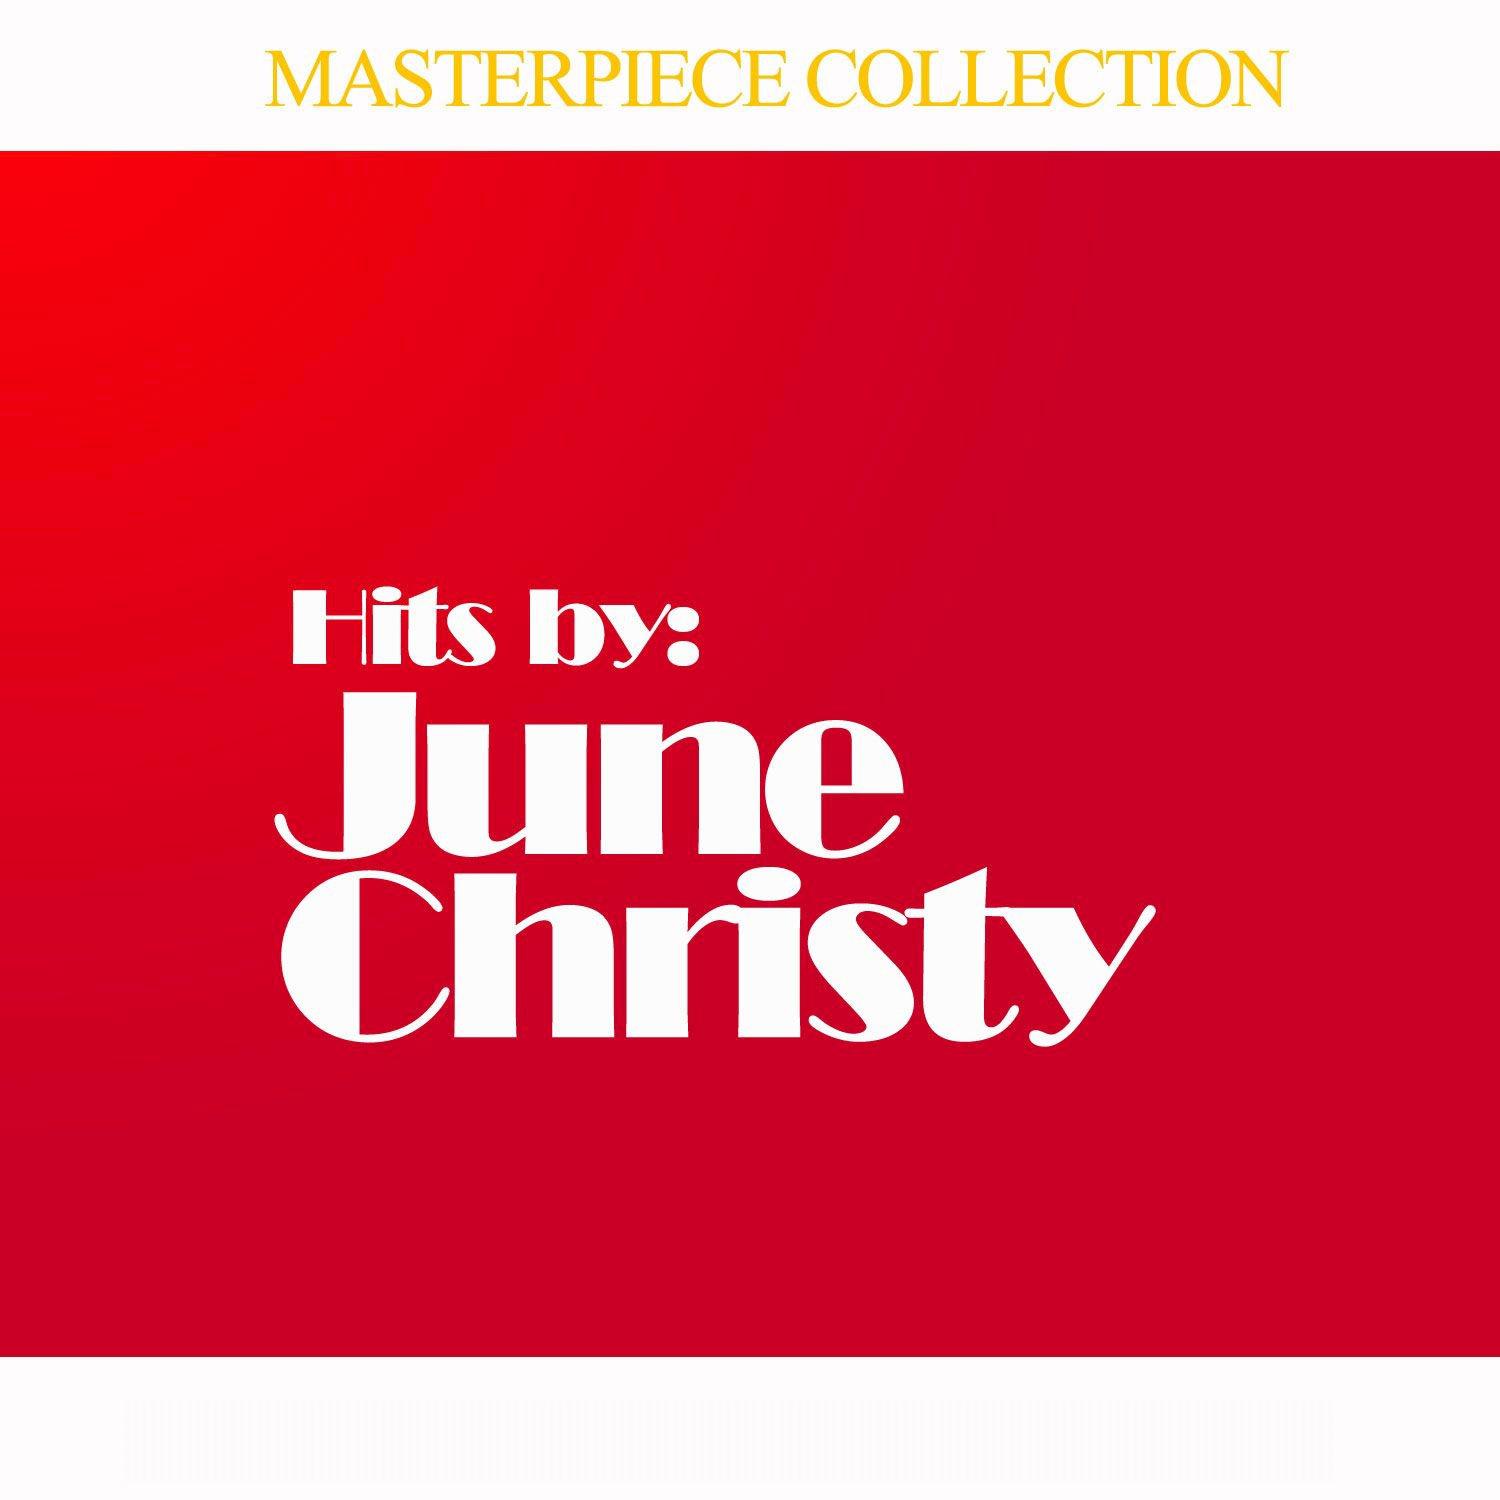 Masterpiece Collection of June Christy